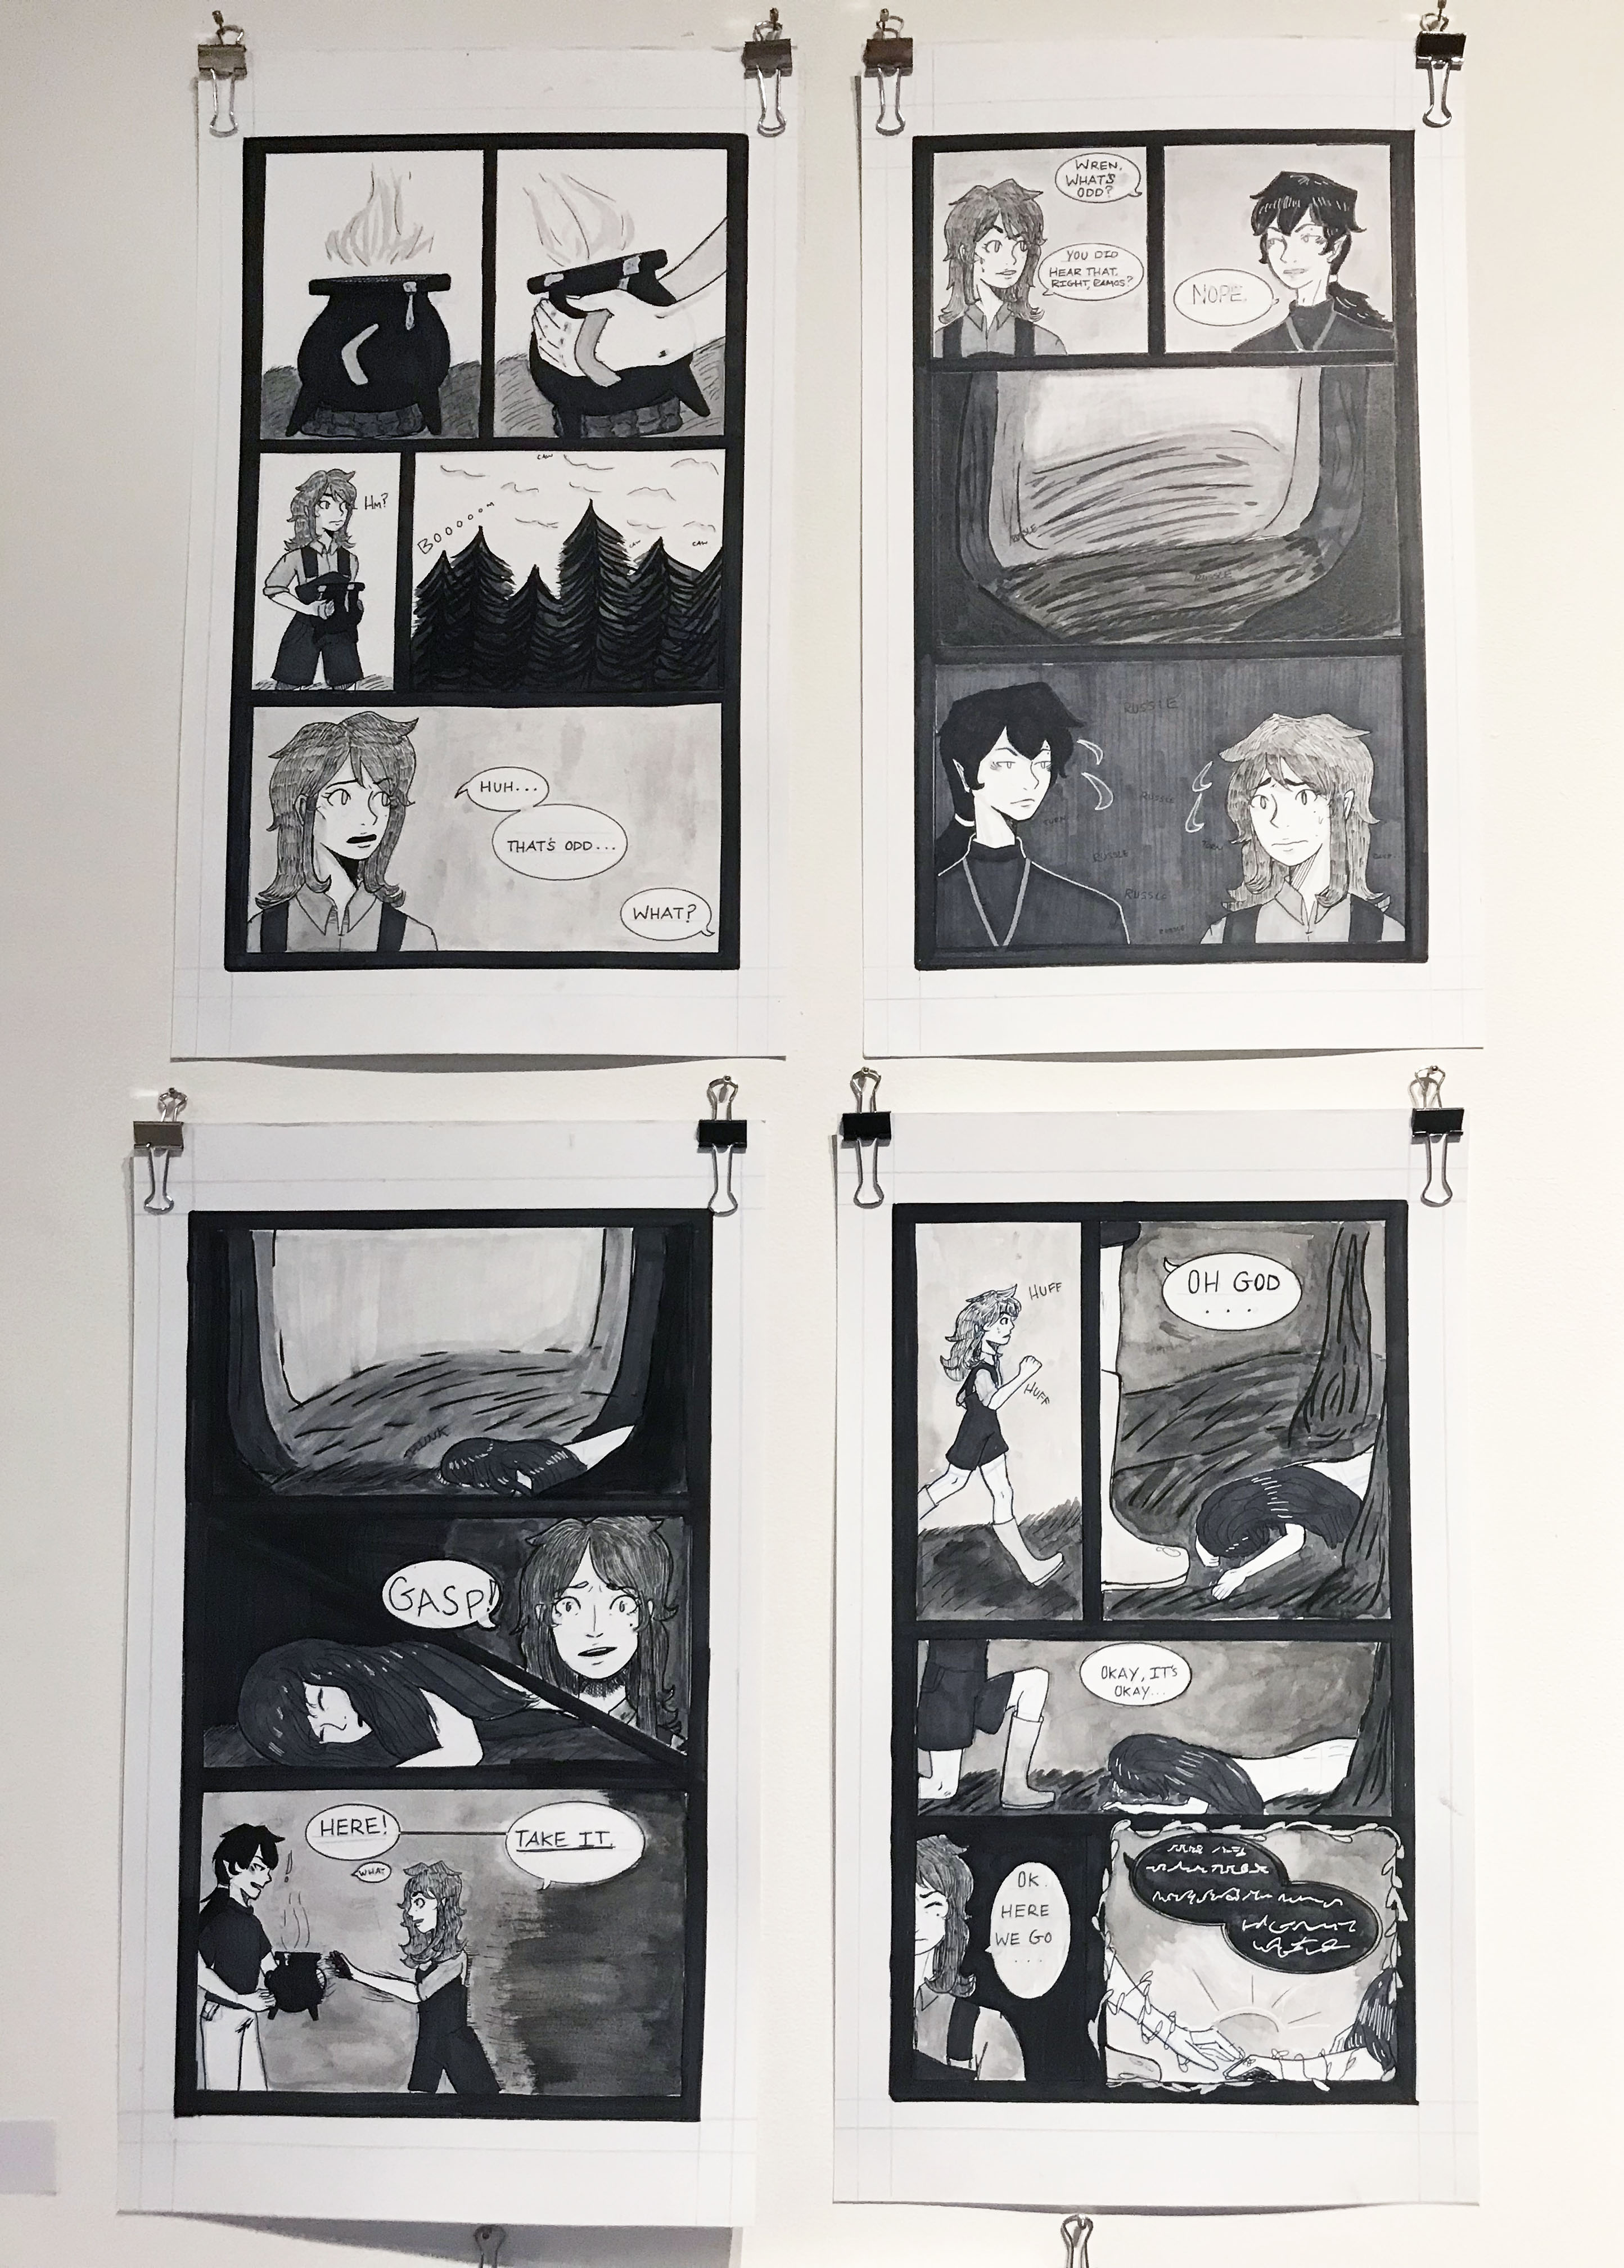 Four pen and ink drawings presented in a grid. All images are in black and white and depict comic cells.